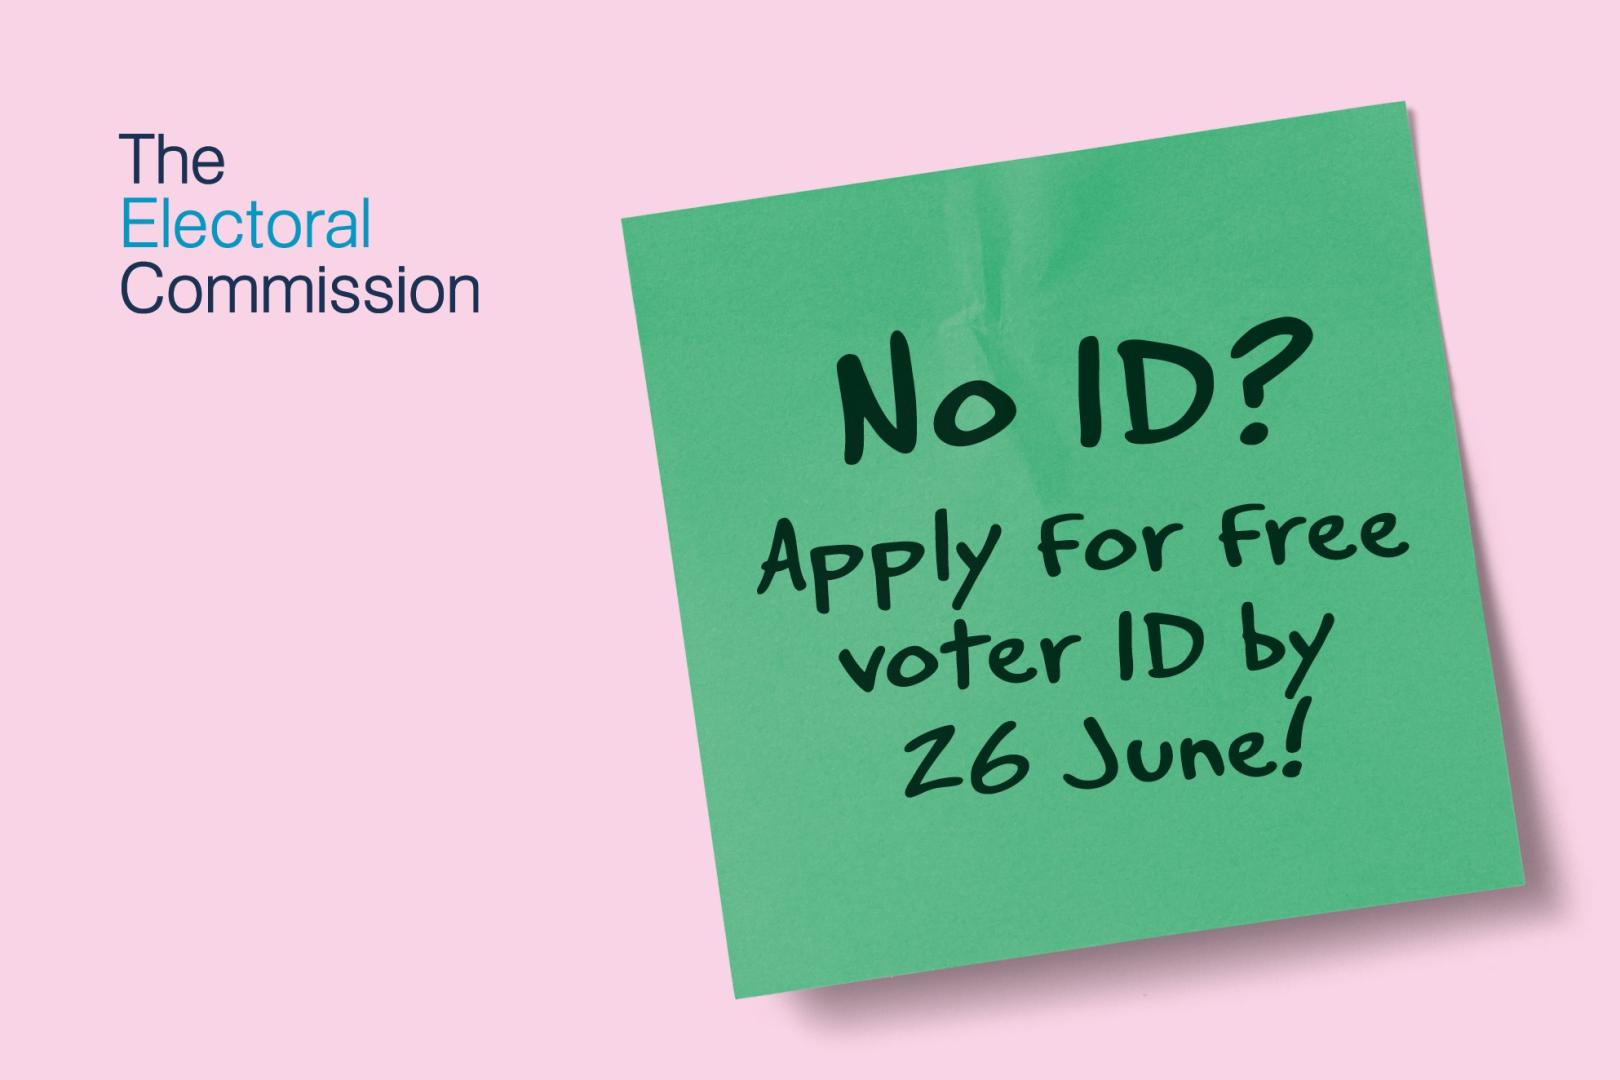 A sticky note with text that reads "No ID? Apply for free voter ID by 26 June!"